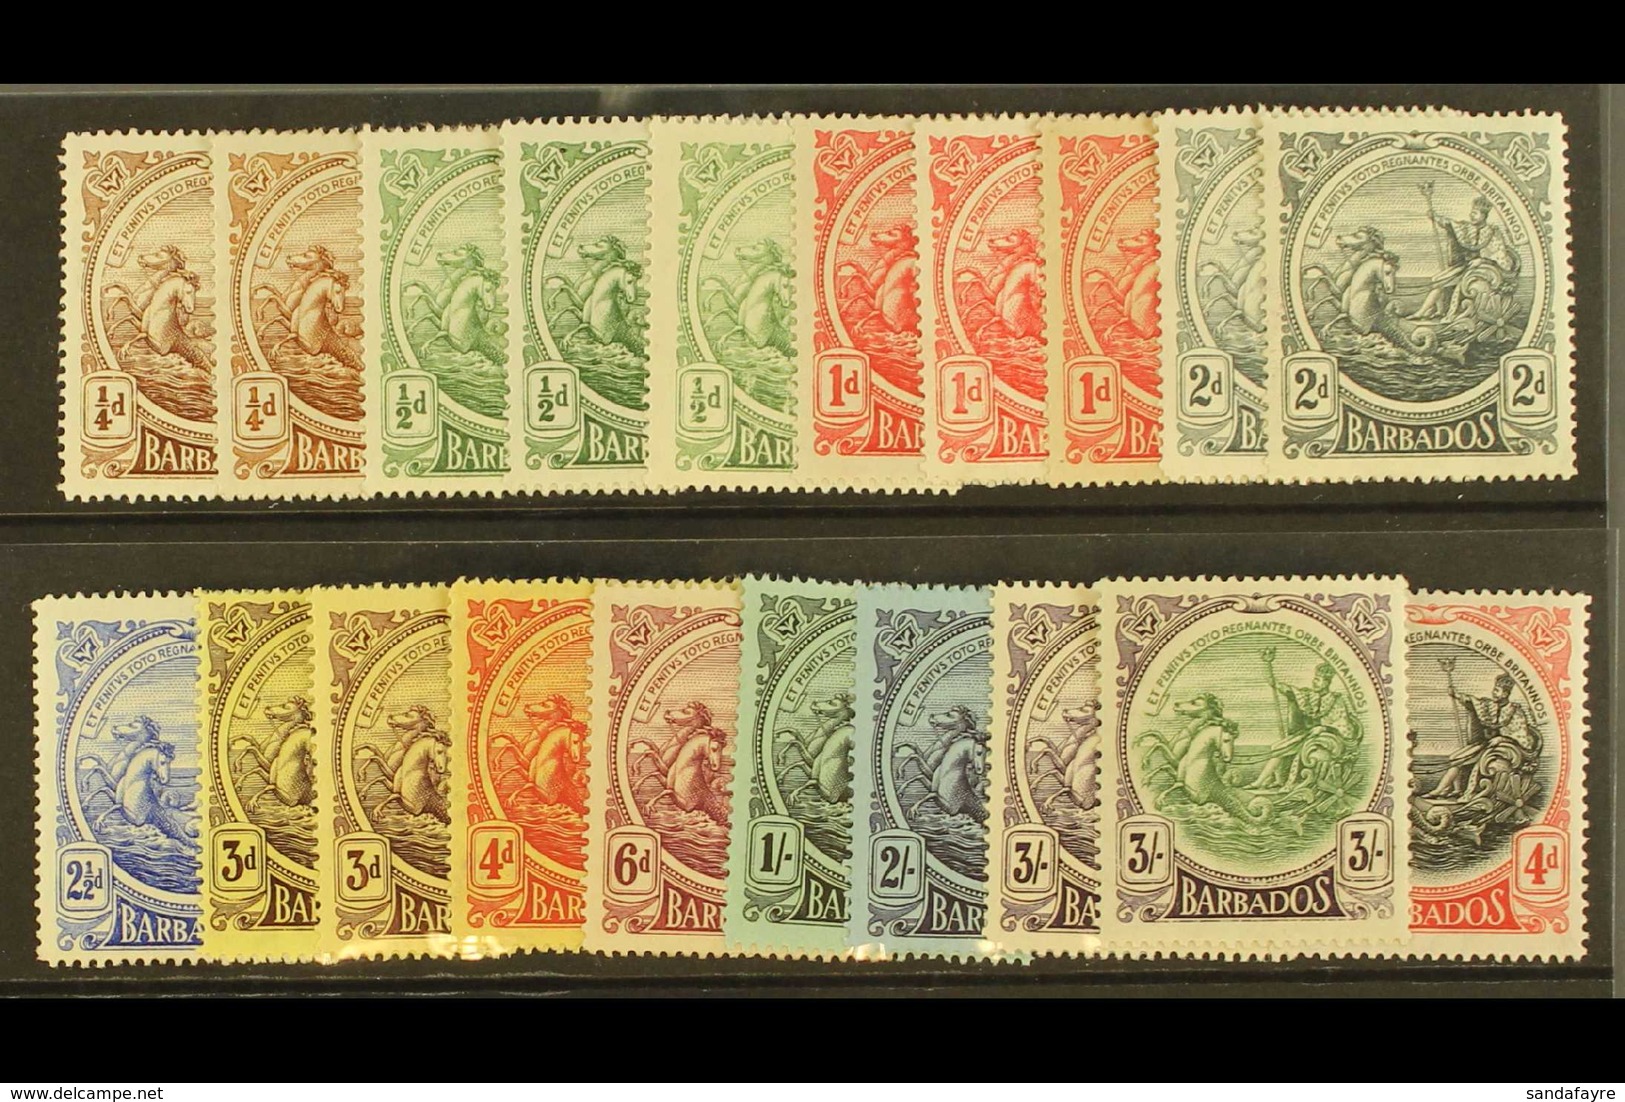 1916 1916 - 1920 Badge Of The Colony Set Complete Including New Colours And Listed Shades, SG 181/91, 199/200, Very Fine - Barbados (...-1966)